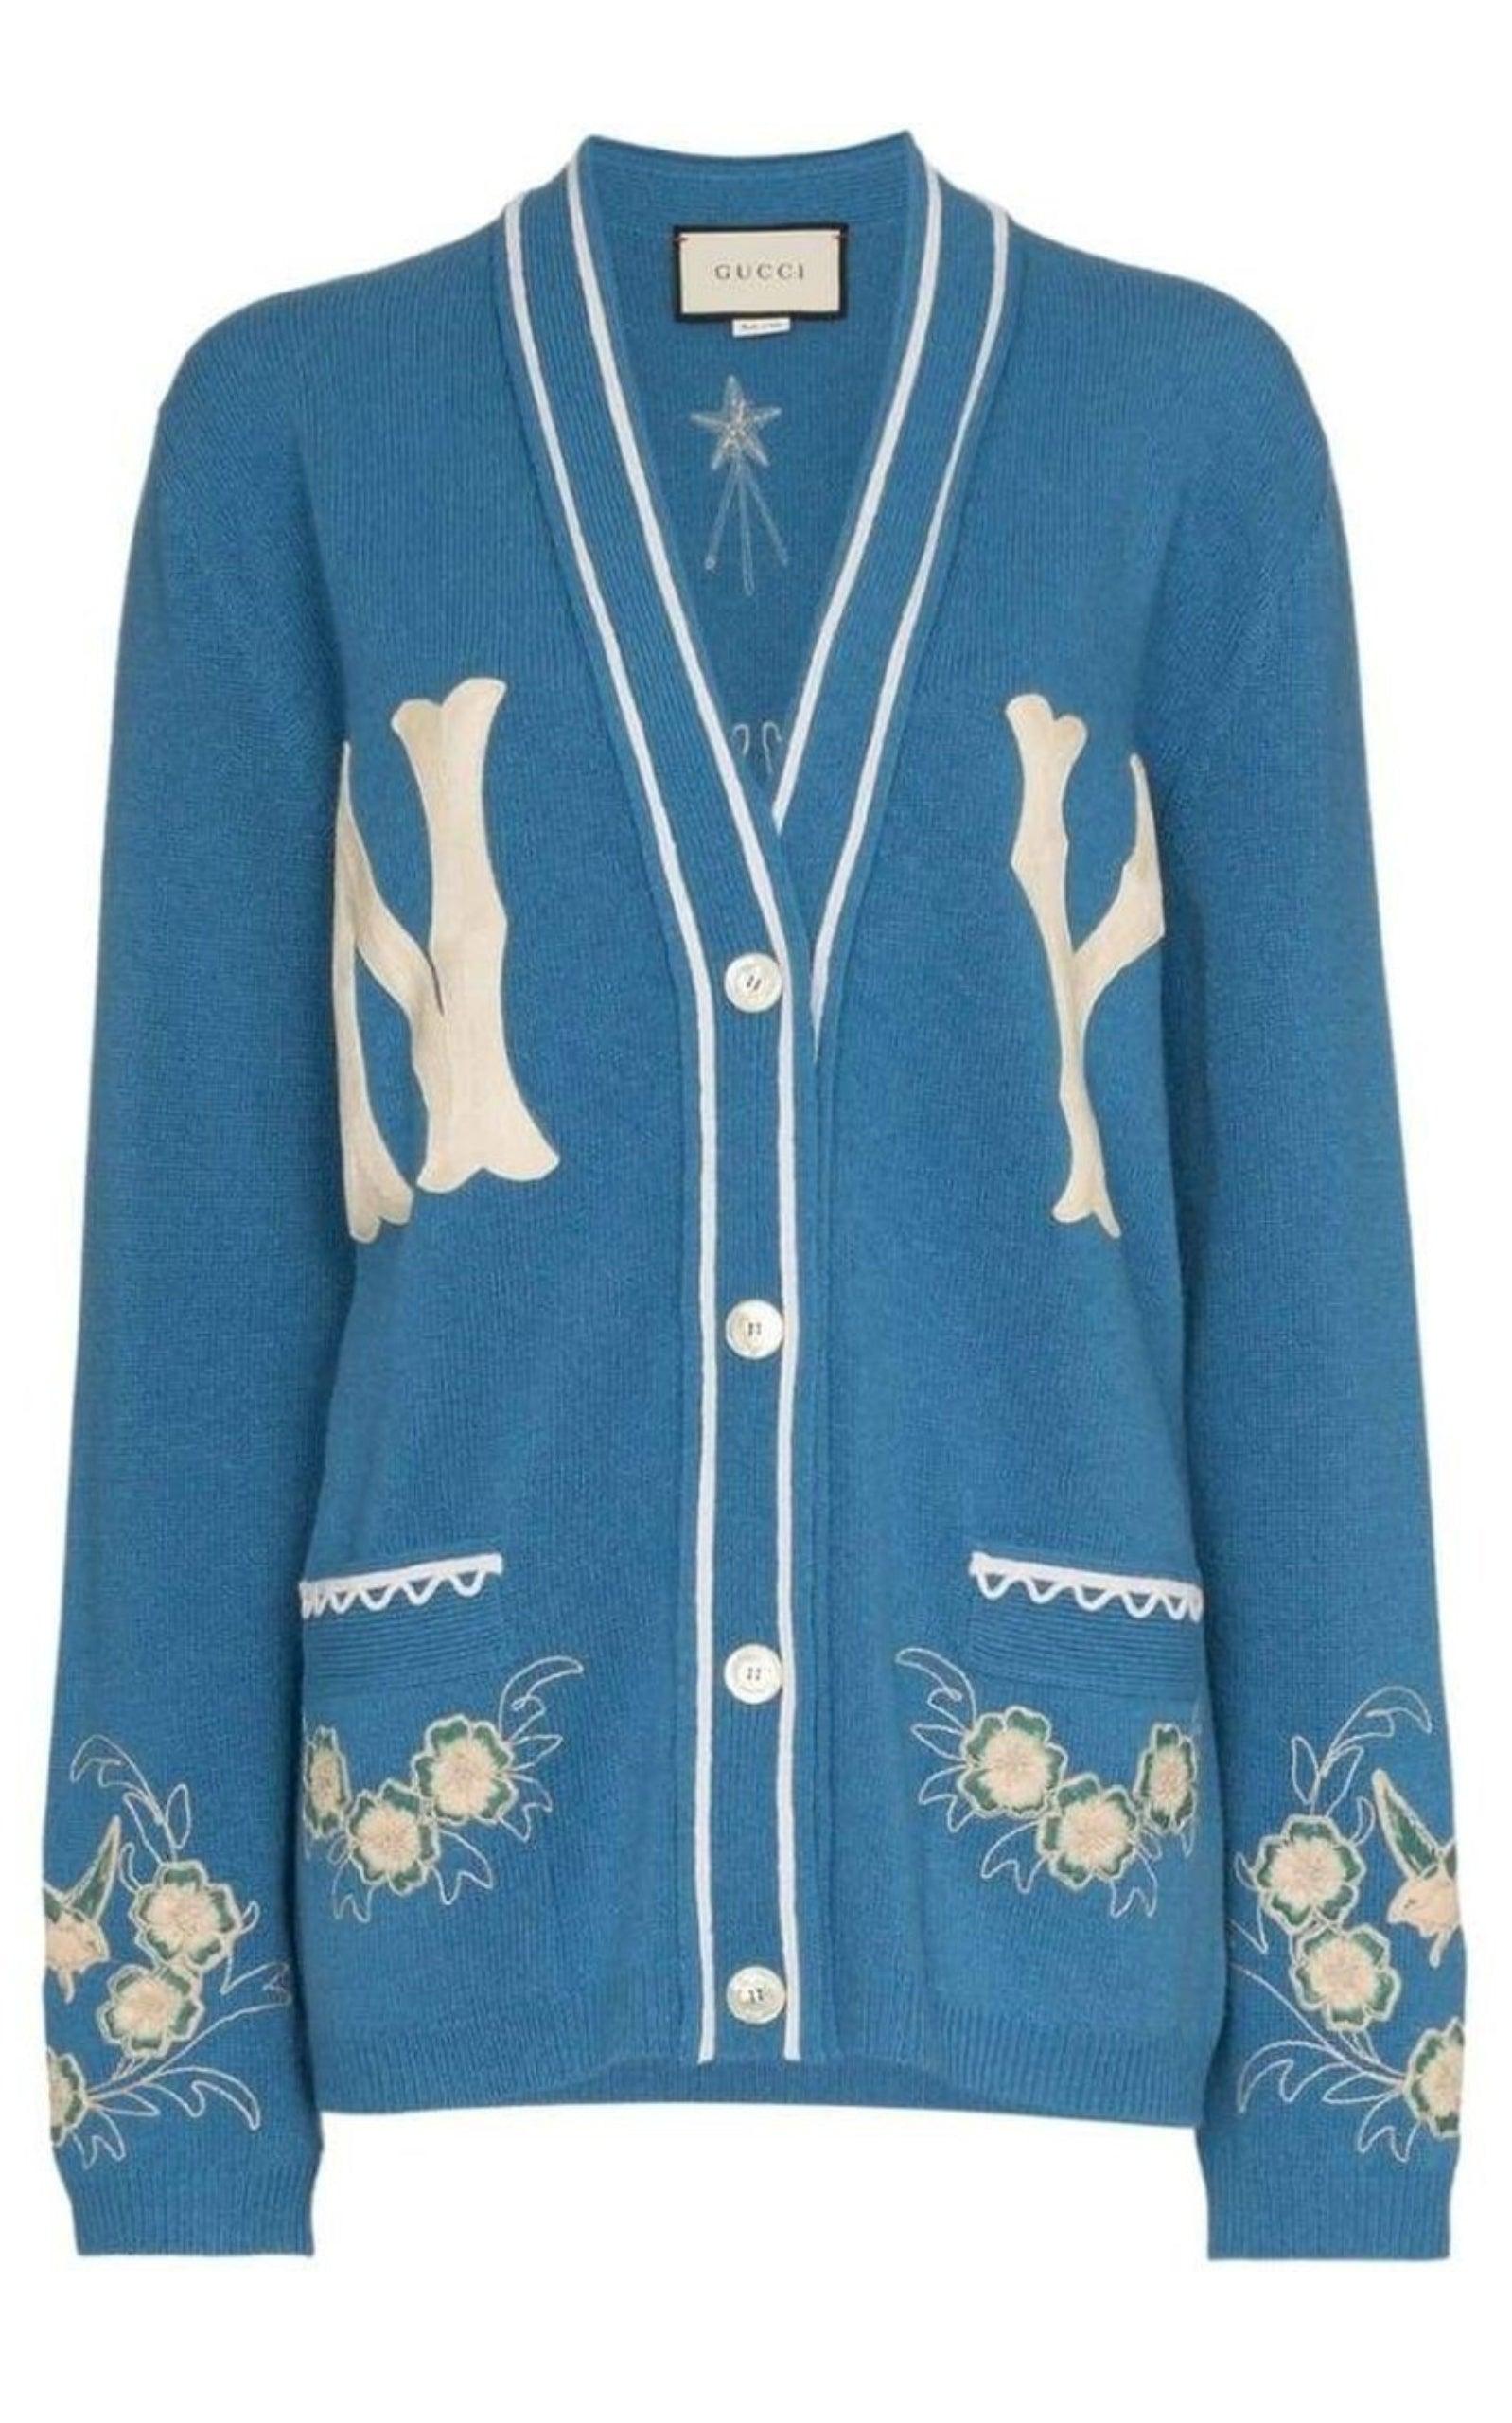 Gucci X NY Yankees Blue Wool Embroidered Sweater Dress S Gucci